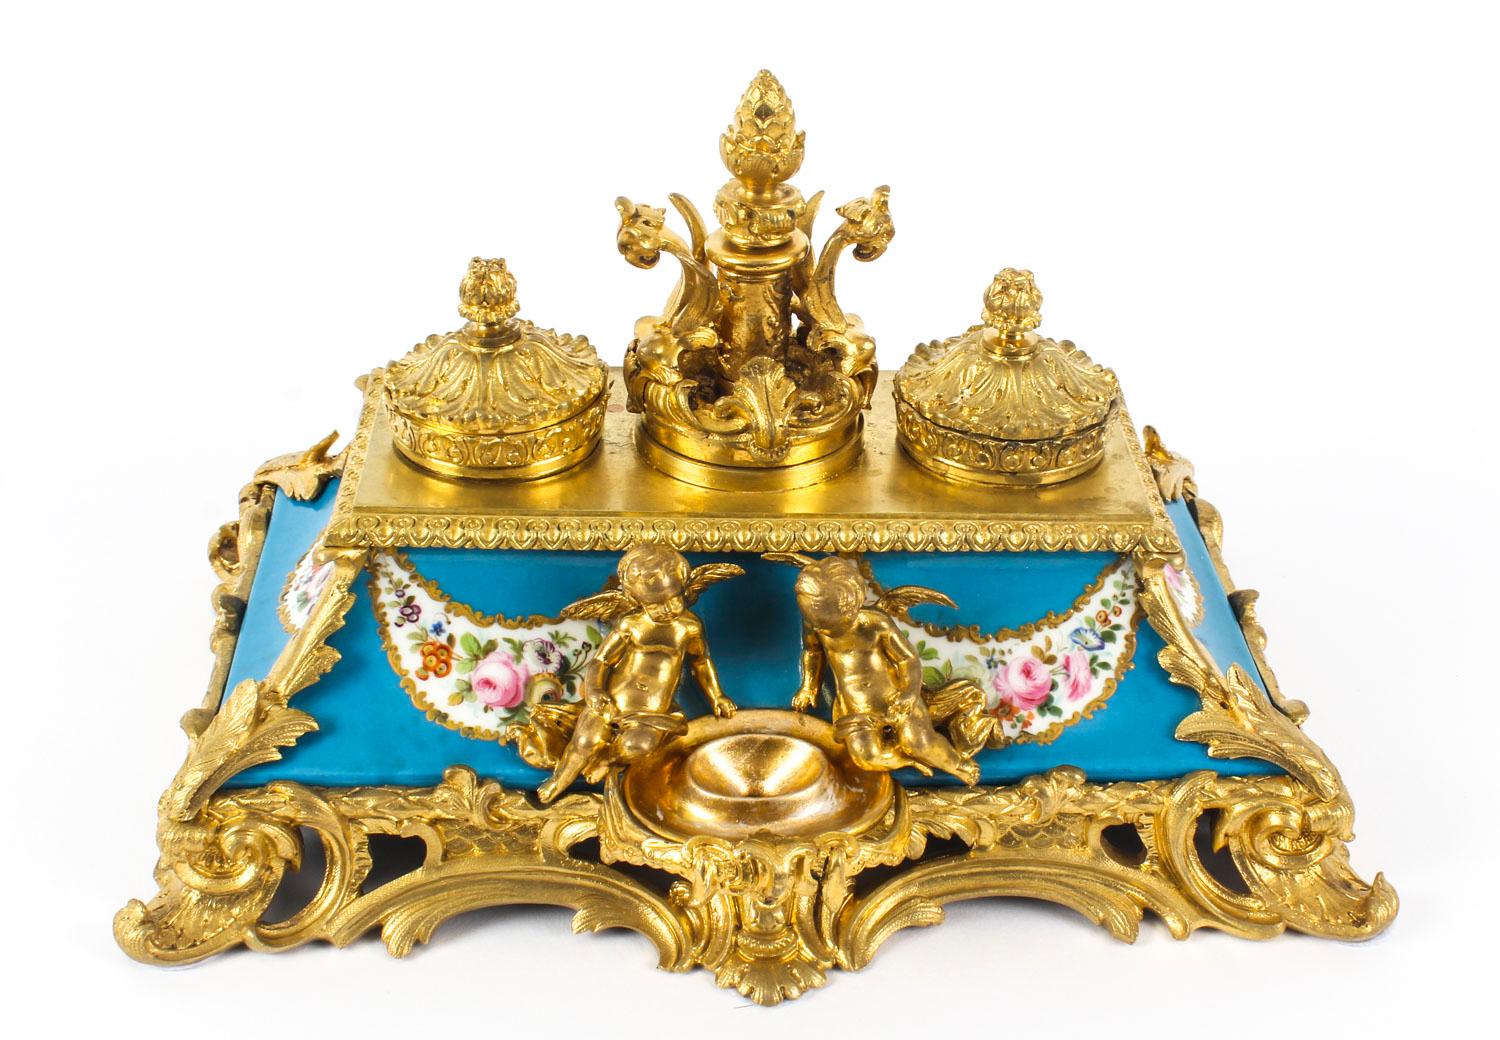 This is a wonderful antique French ormolu inkstand, mounted with Bleu Celeste Sèvres porcelain panels that have been beautifully gilded and painted with floral garlands, circa 1870 in date.

The inkstand with a central ink reservoir and inkwell